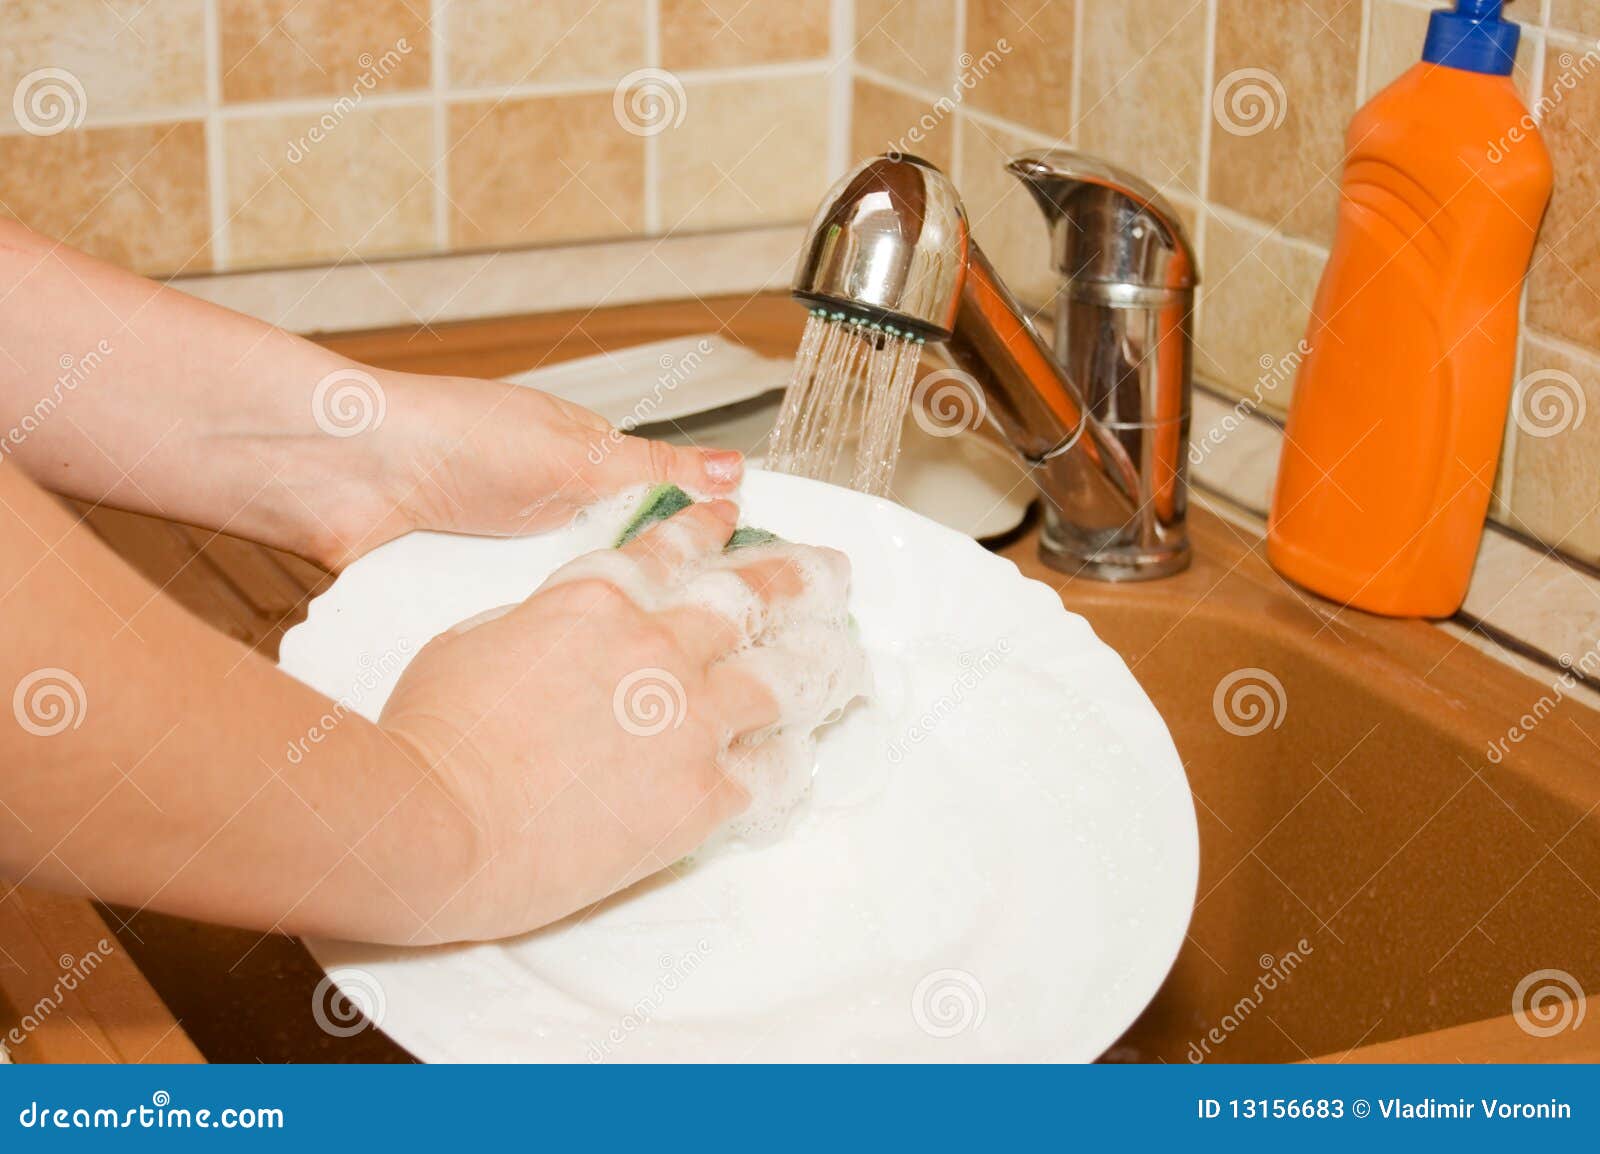 the woman washes ware on kitchen